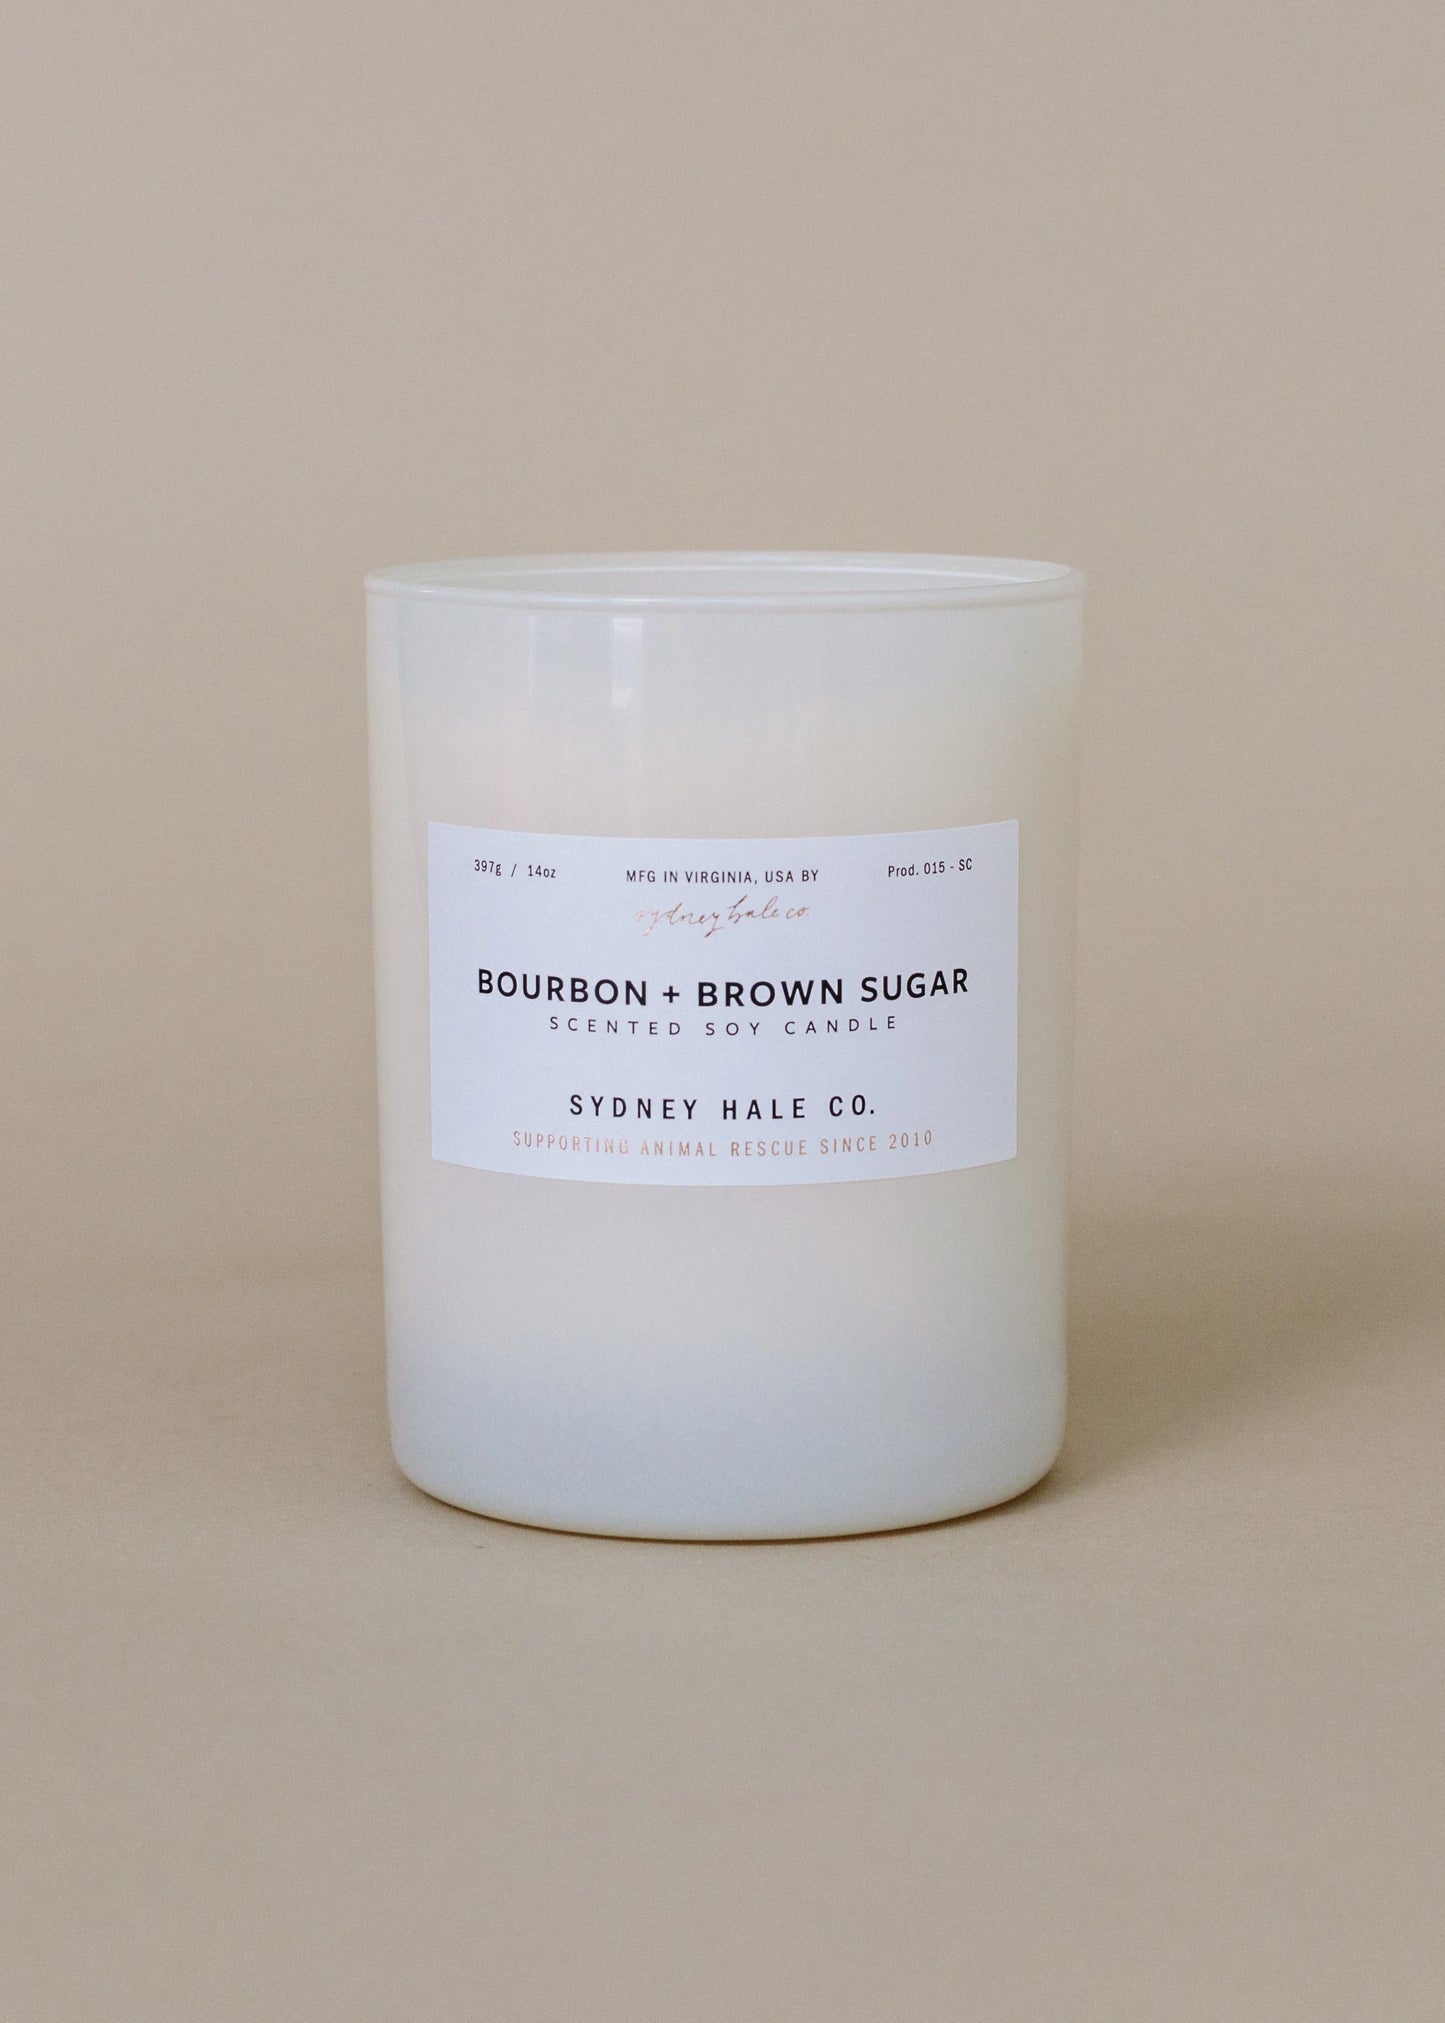 Bourbon + Brown Sugar Soy Candle